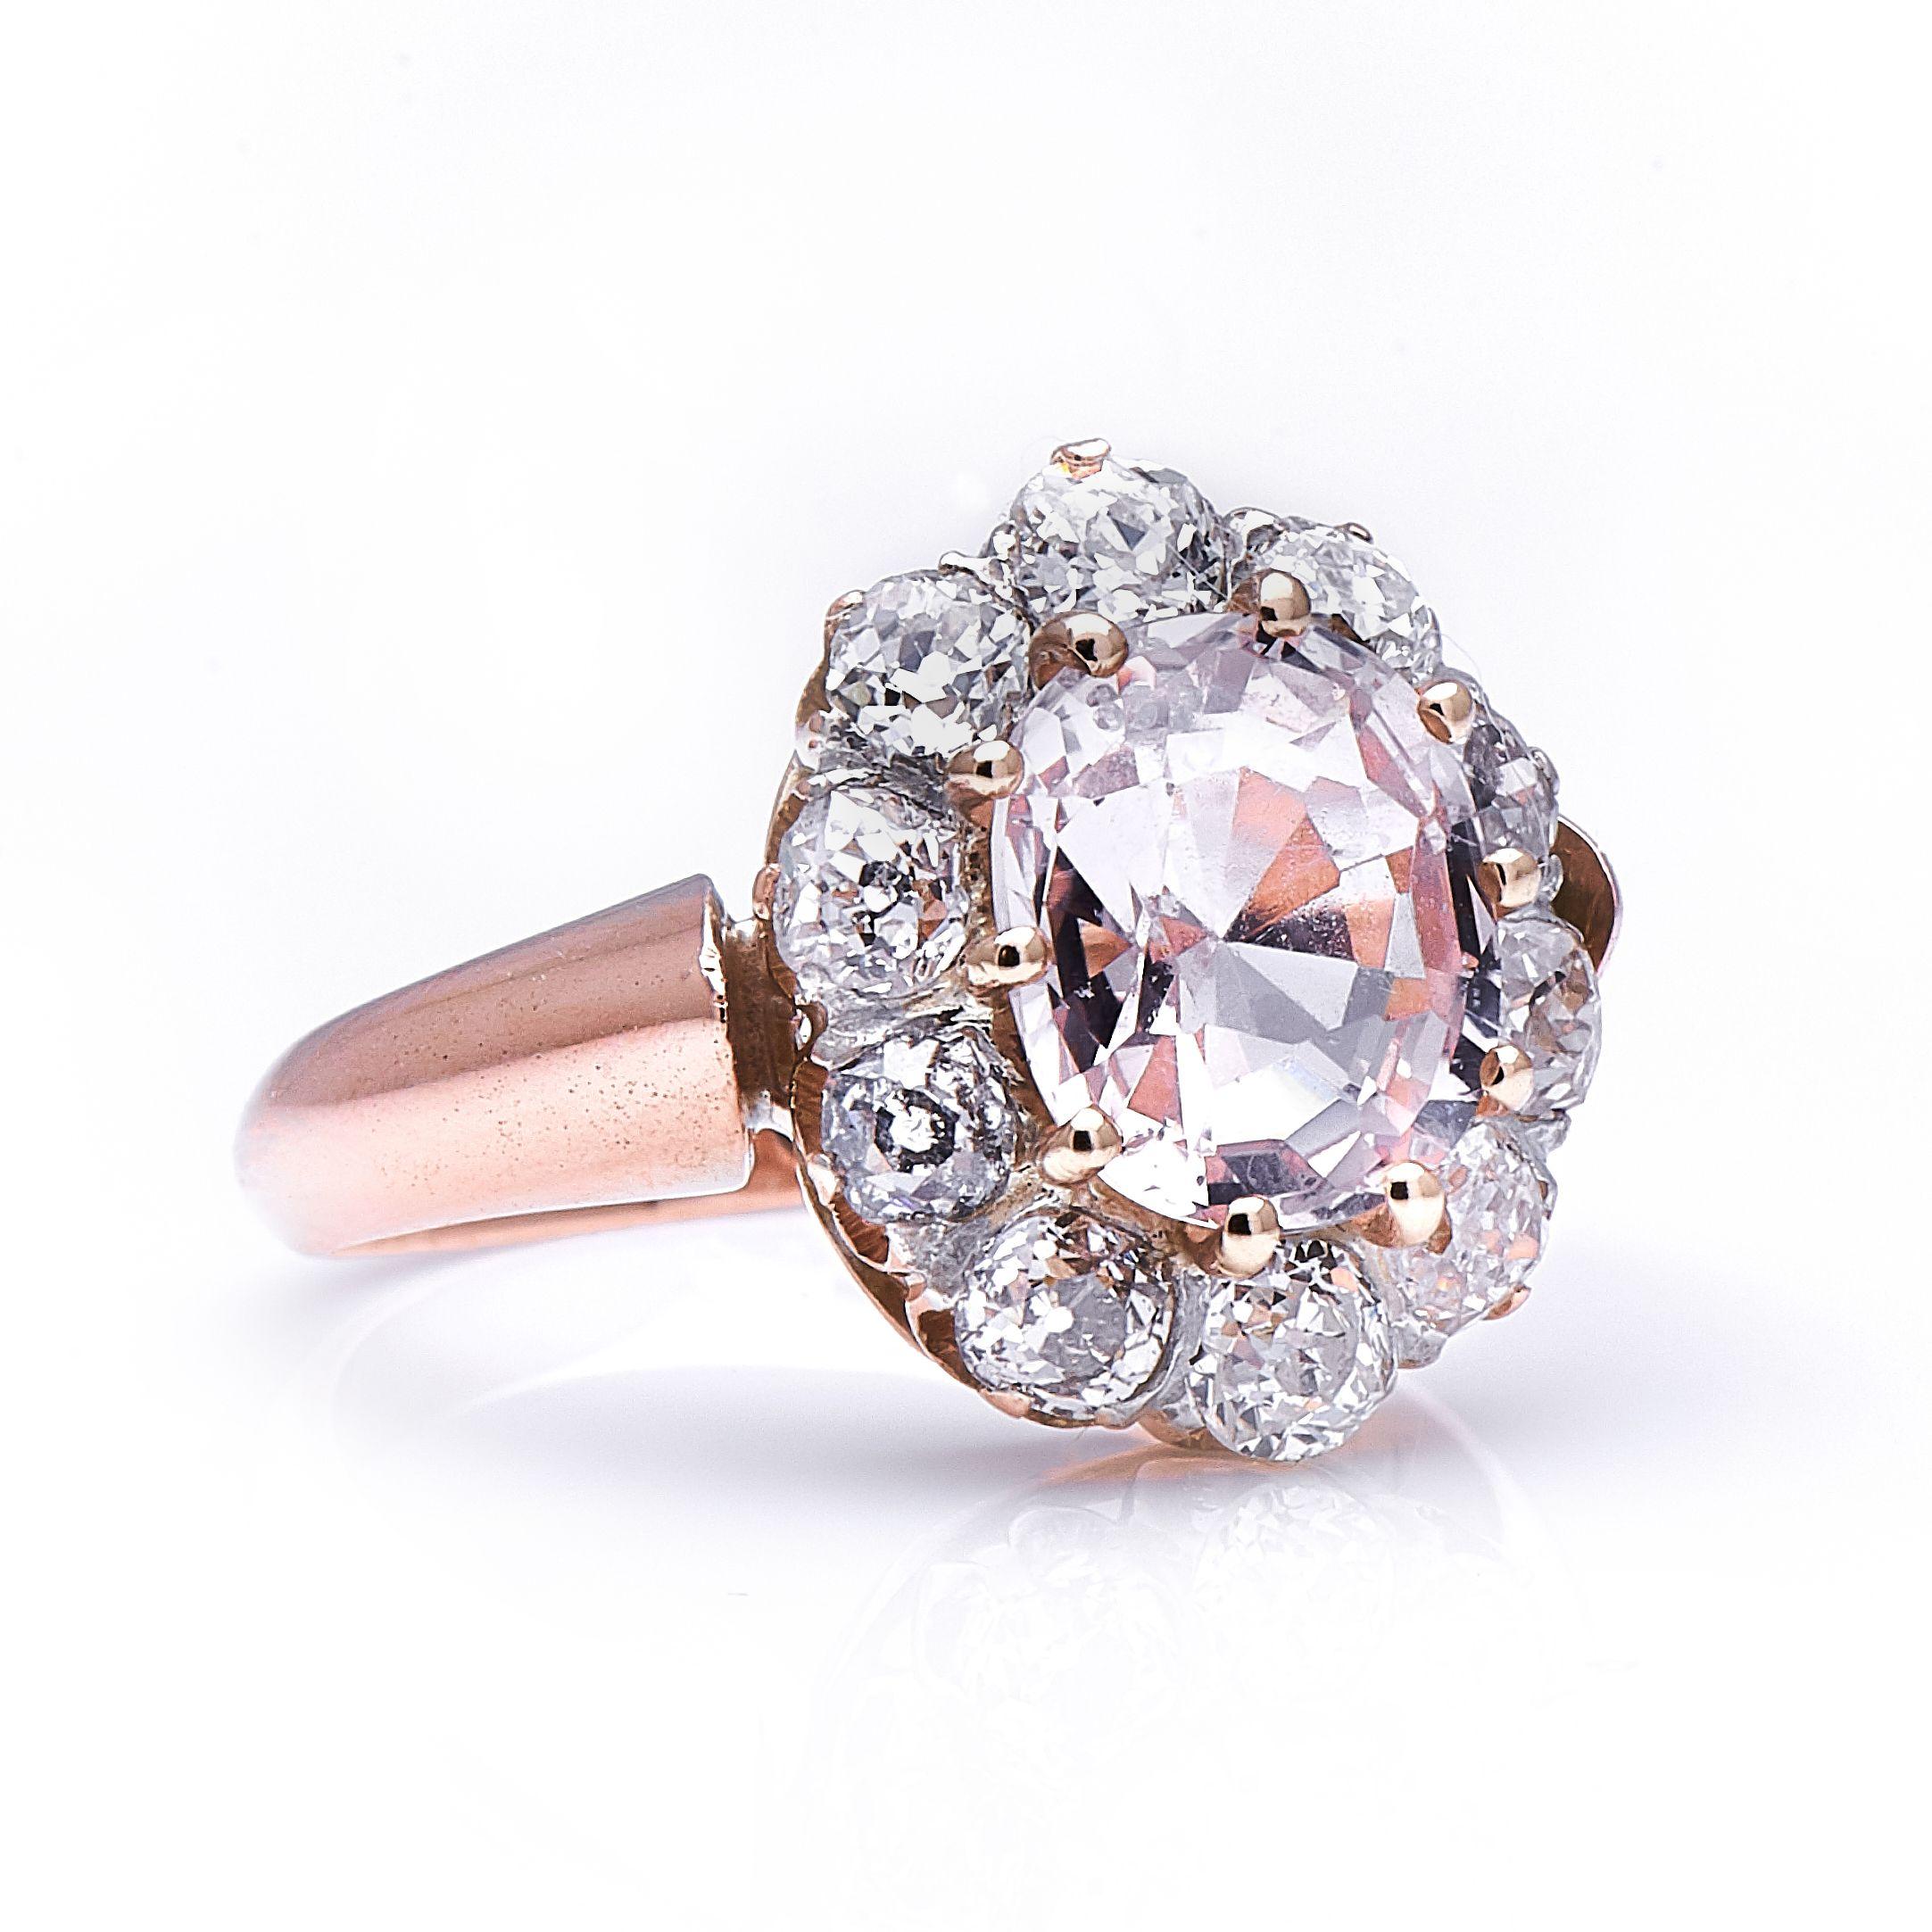 Pale peach sapphire and diamond ring. At the centre of this ring is a charming sapphire of a very subtle pale peach colour, weighing approximately 2.30 carats. Its delicate hue, coupled with its excellent transparency and well-proportioned cut make